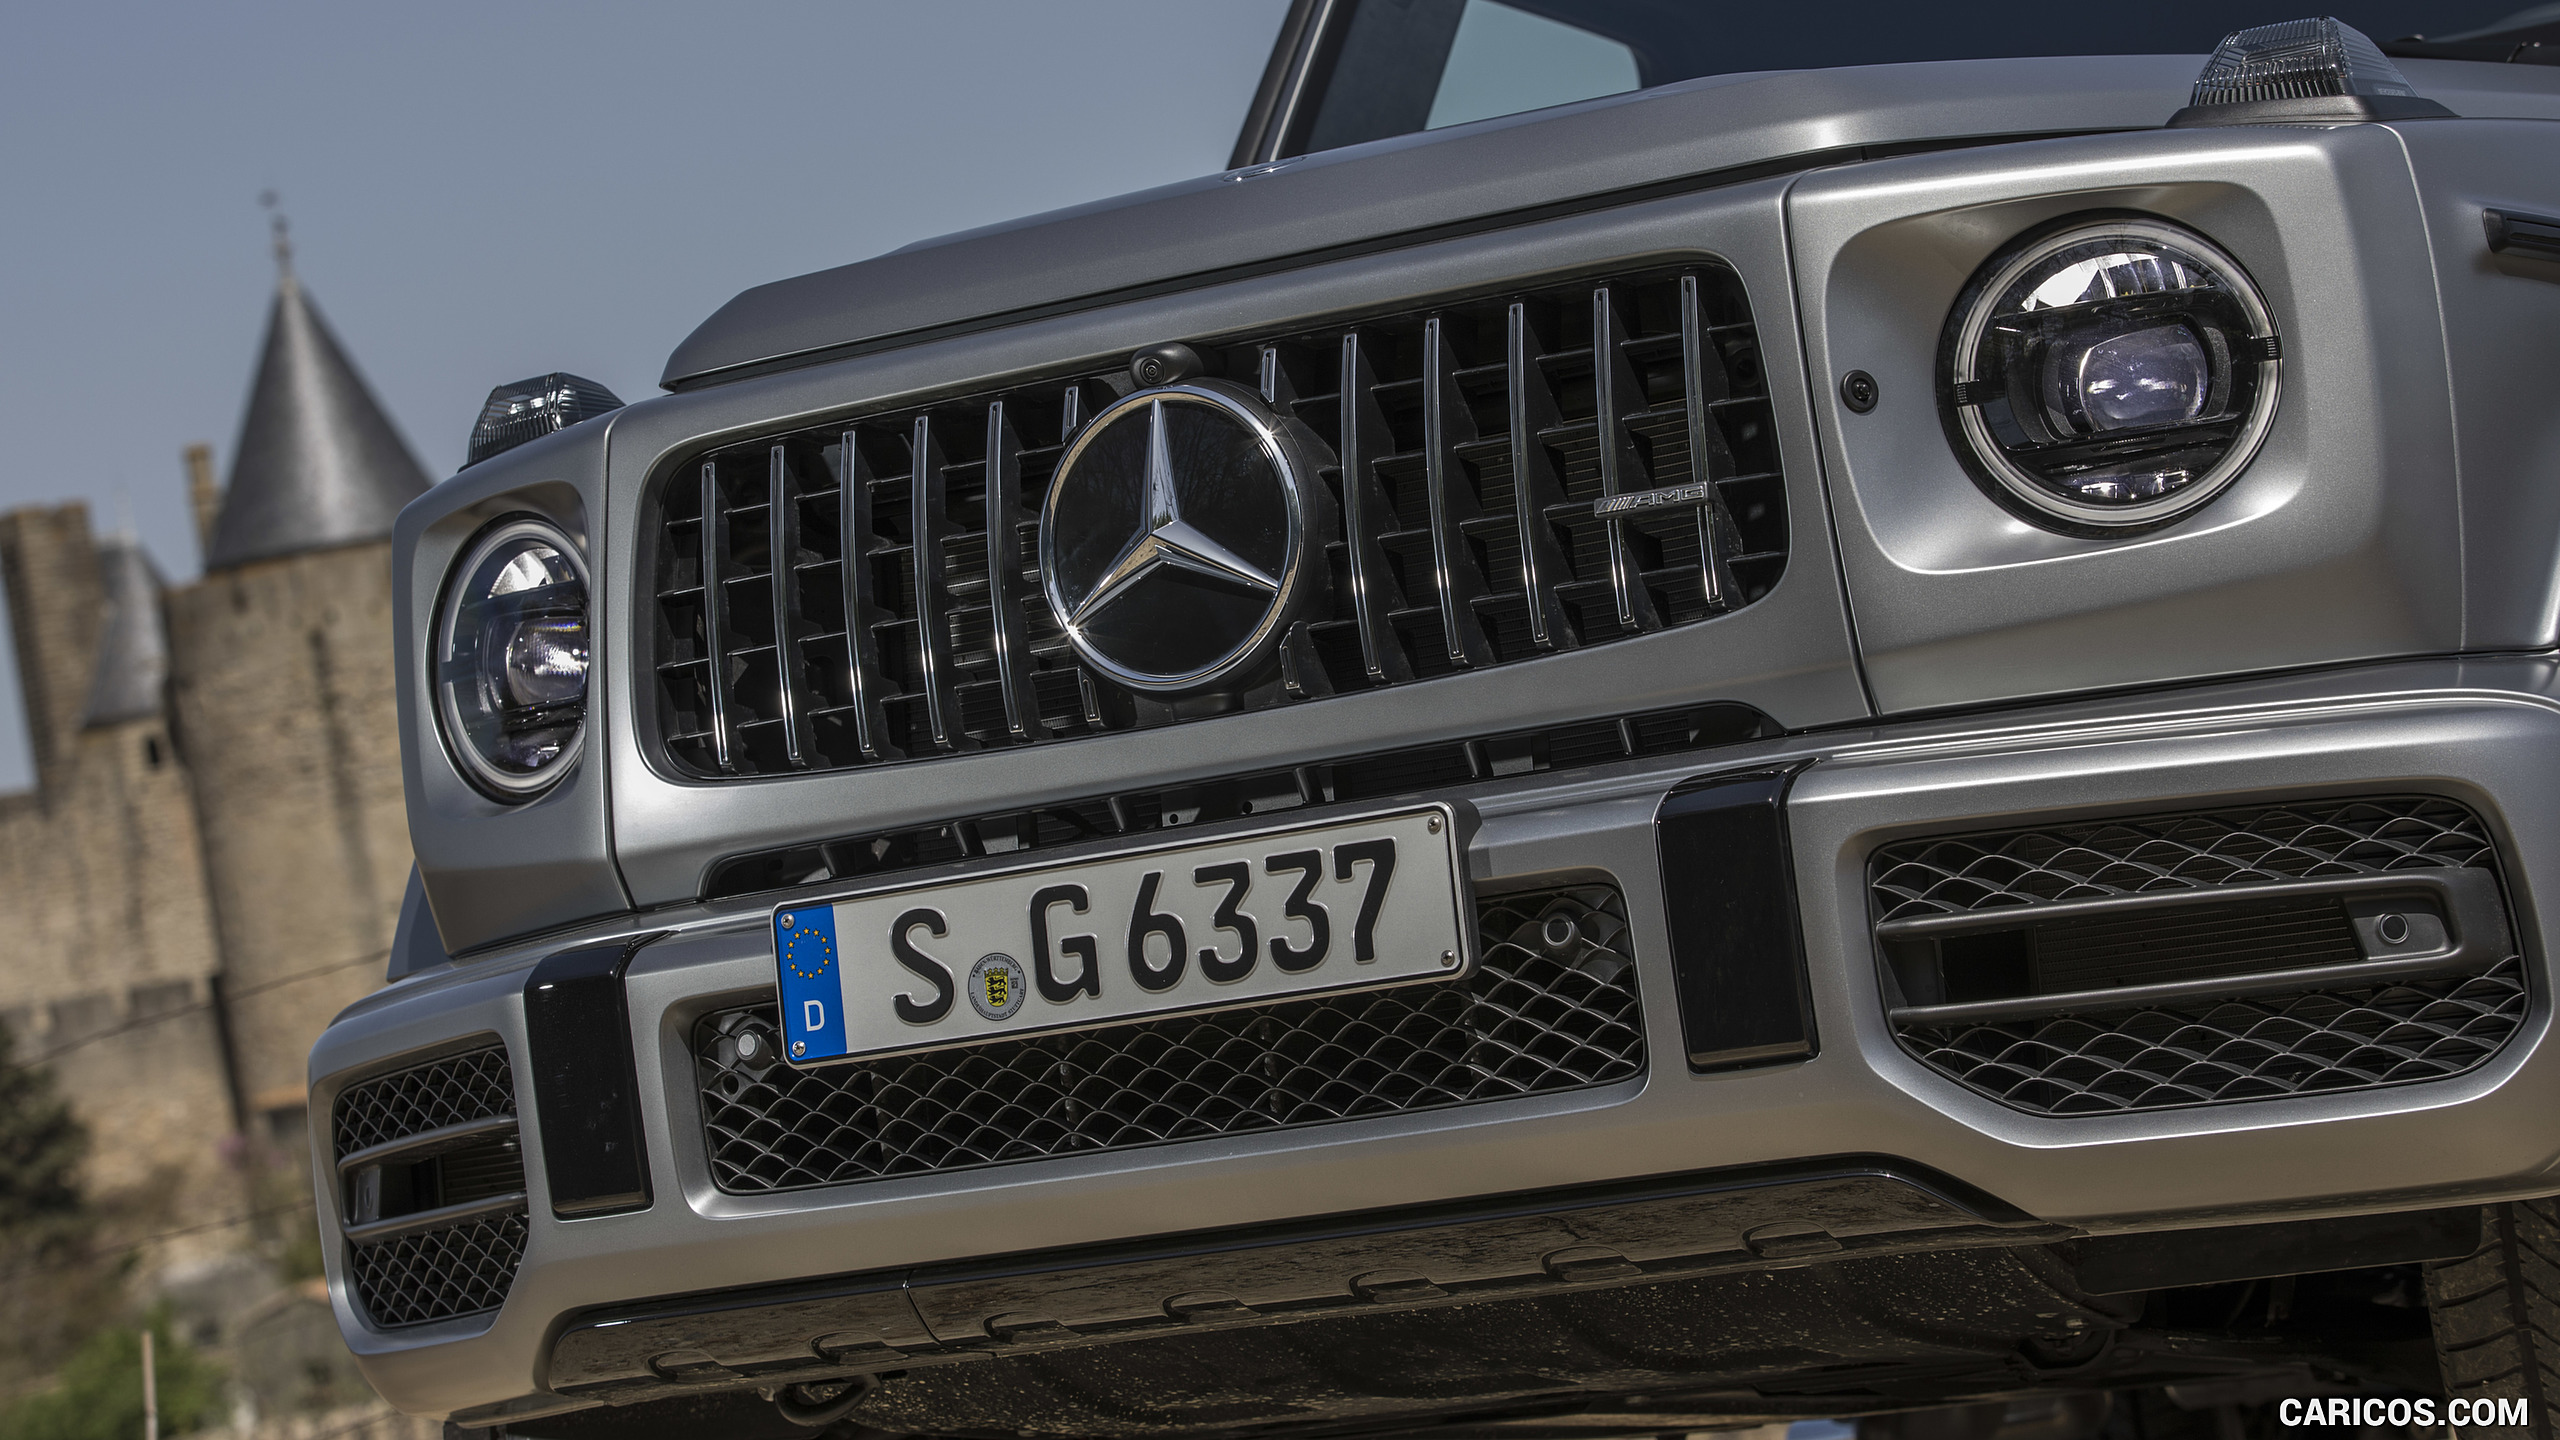 2019 Mercedes-AMG G63 - Grille, #169 of 452